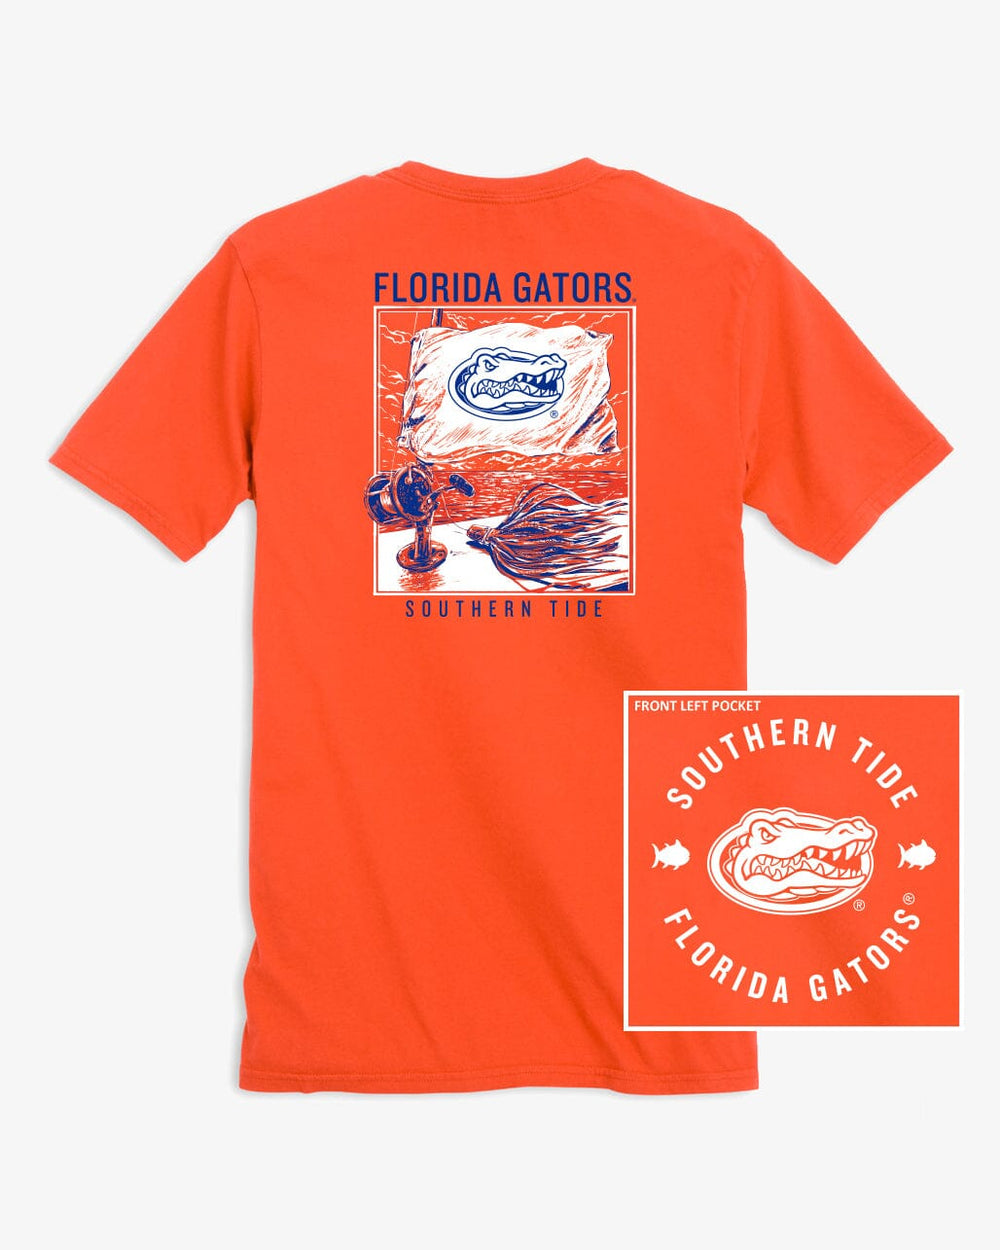 The front view of the Florida Gators Fishing Flag T-Shirt by Southern Tide - Endzone Orange